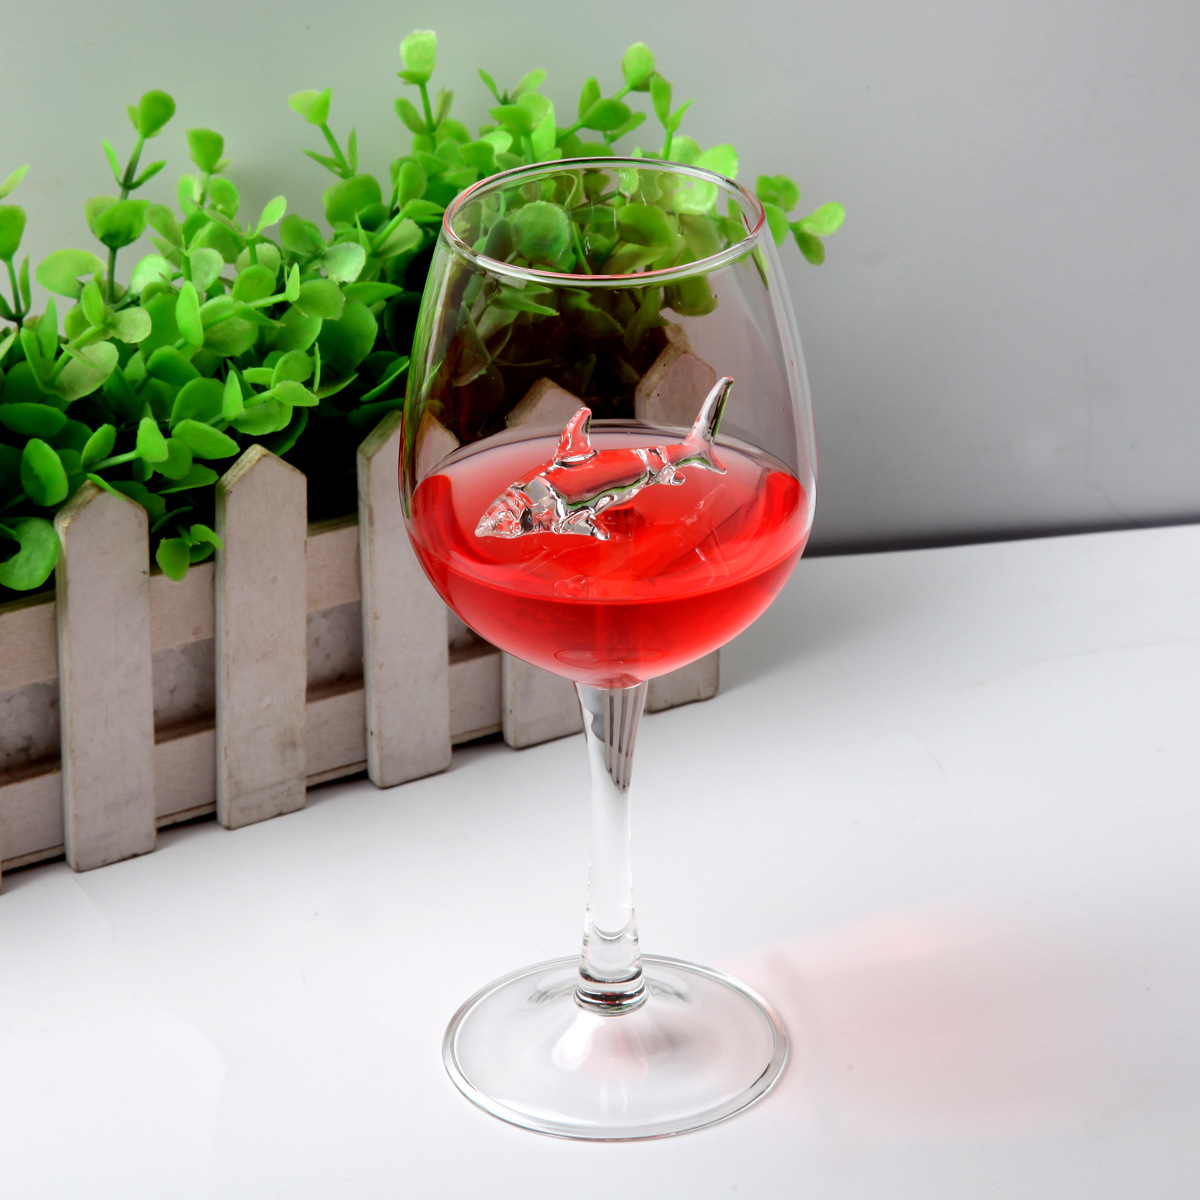 Brand New Shark Wine Glass Cup European Crystal Red Wine Cup Wedding Party Gift High Borosilicate Glass Cocktail Bar Decorating